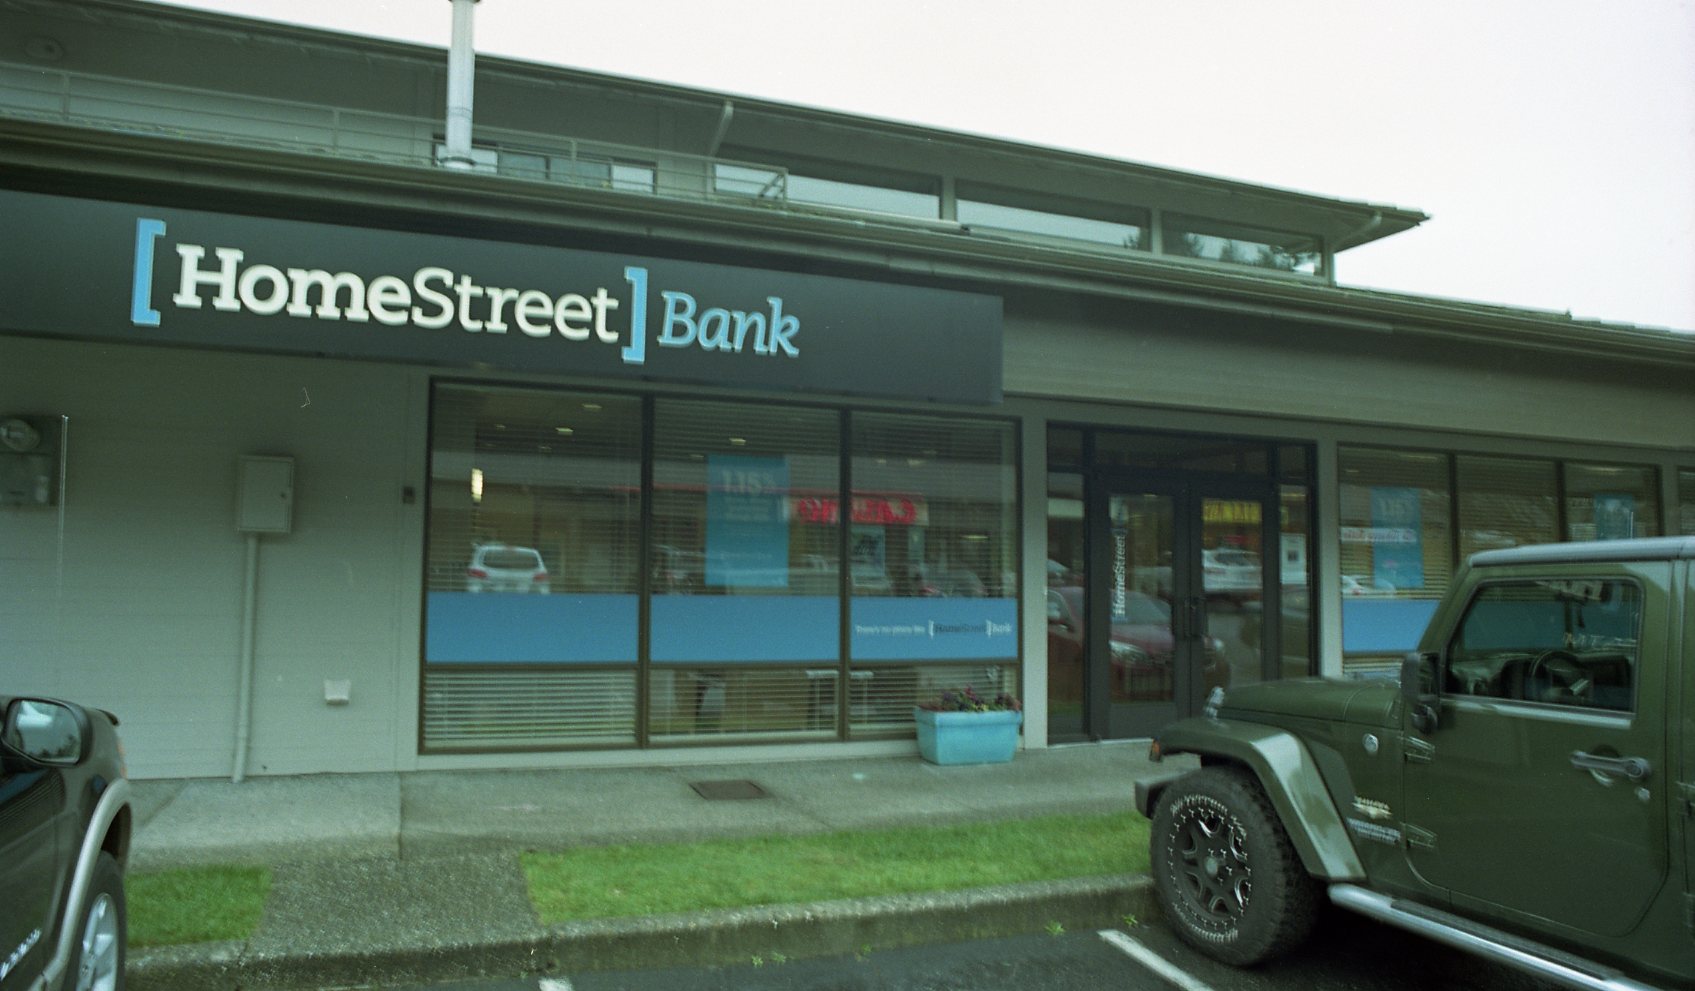 HomeStreet Bank and Home Loan Center